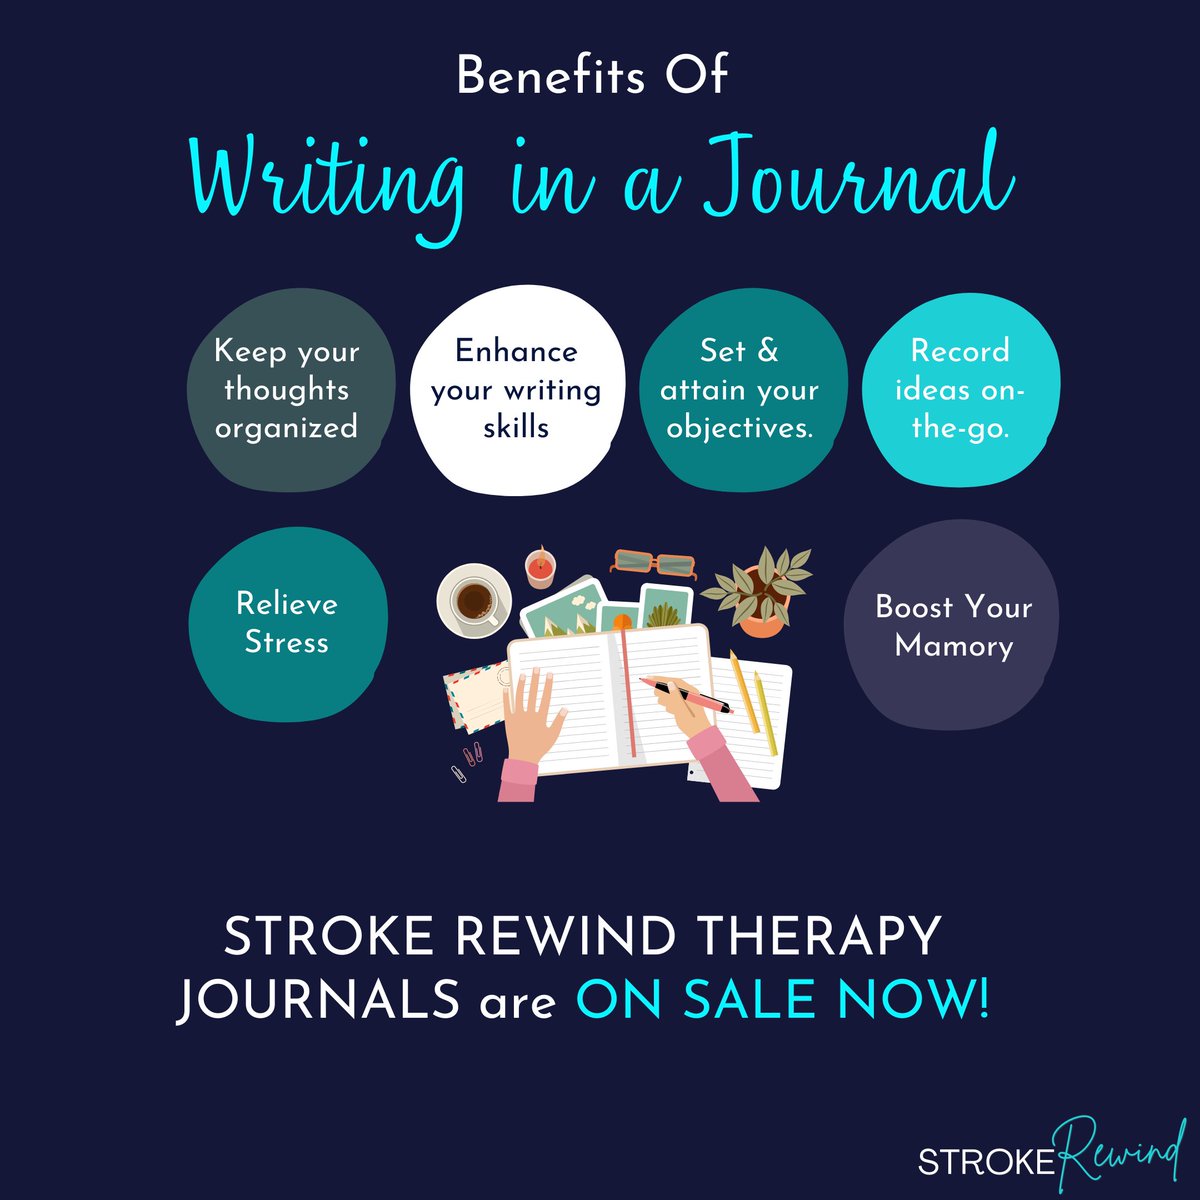 New Year New You! Our Therapy Journals are ON SALE now! Get yours today: etsy.com/shop/StrokeRew…

 #journal #journaling #journalideas #journalingcommunity #getyourstoday #strokerewind #strokesupport #strokelife #therapyjournal #therapyjournaling #therapyjournalofinstagram